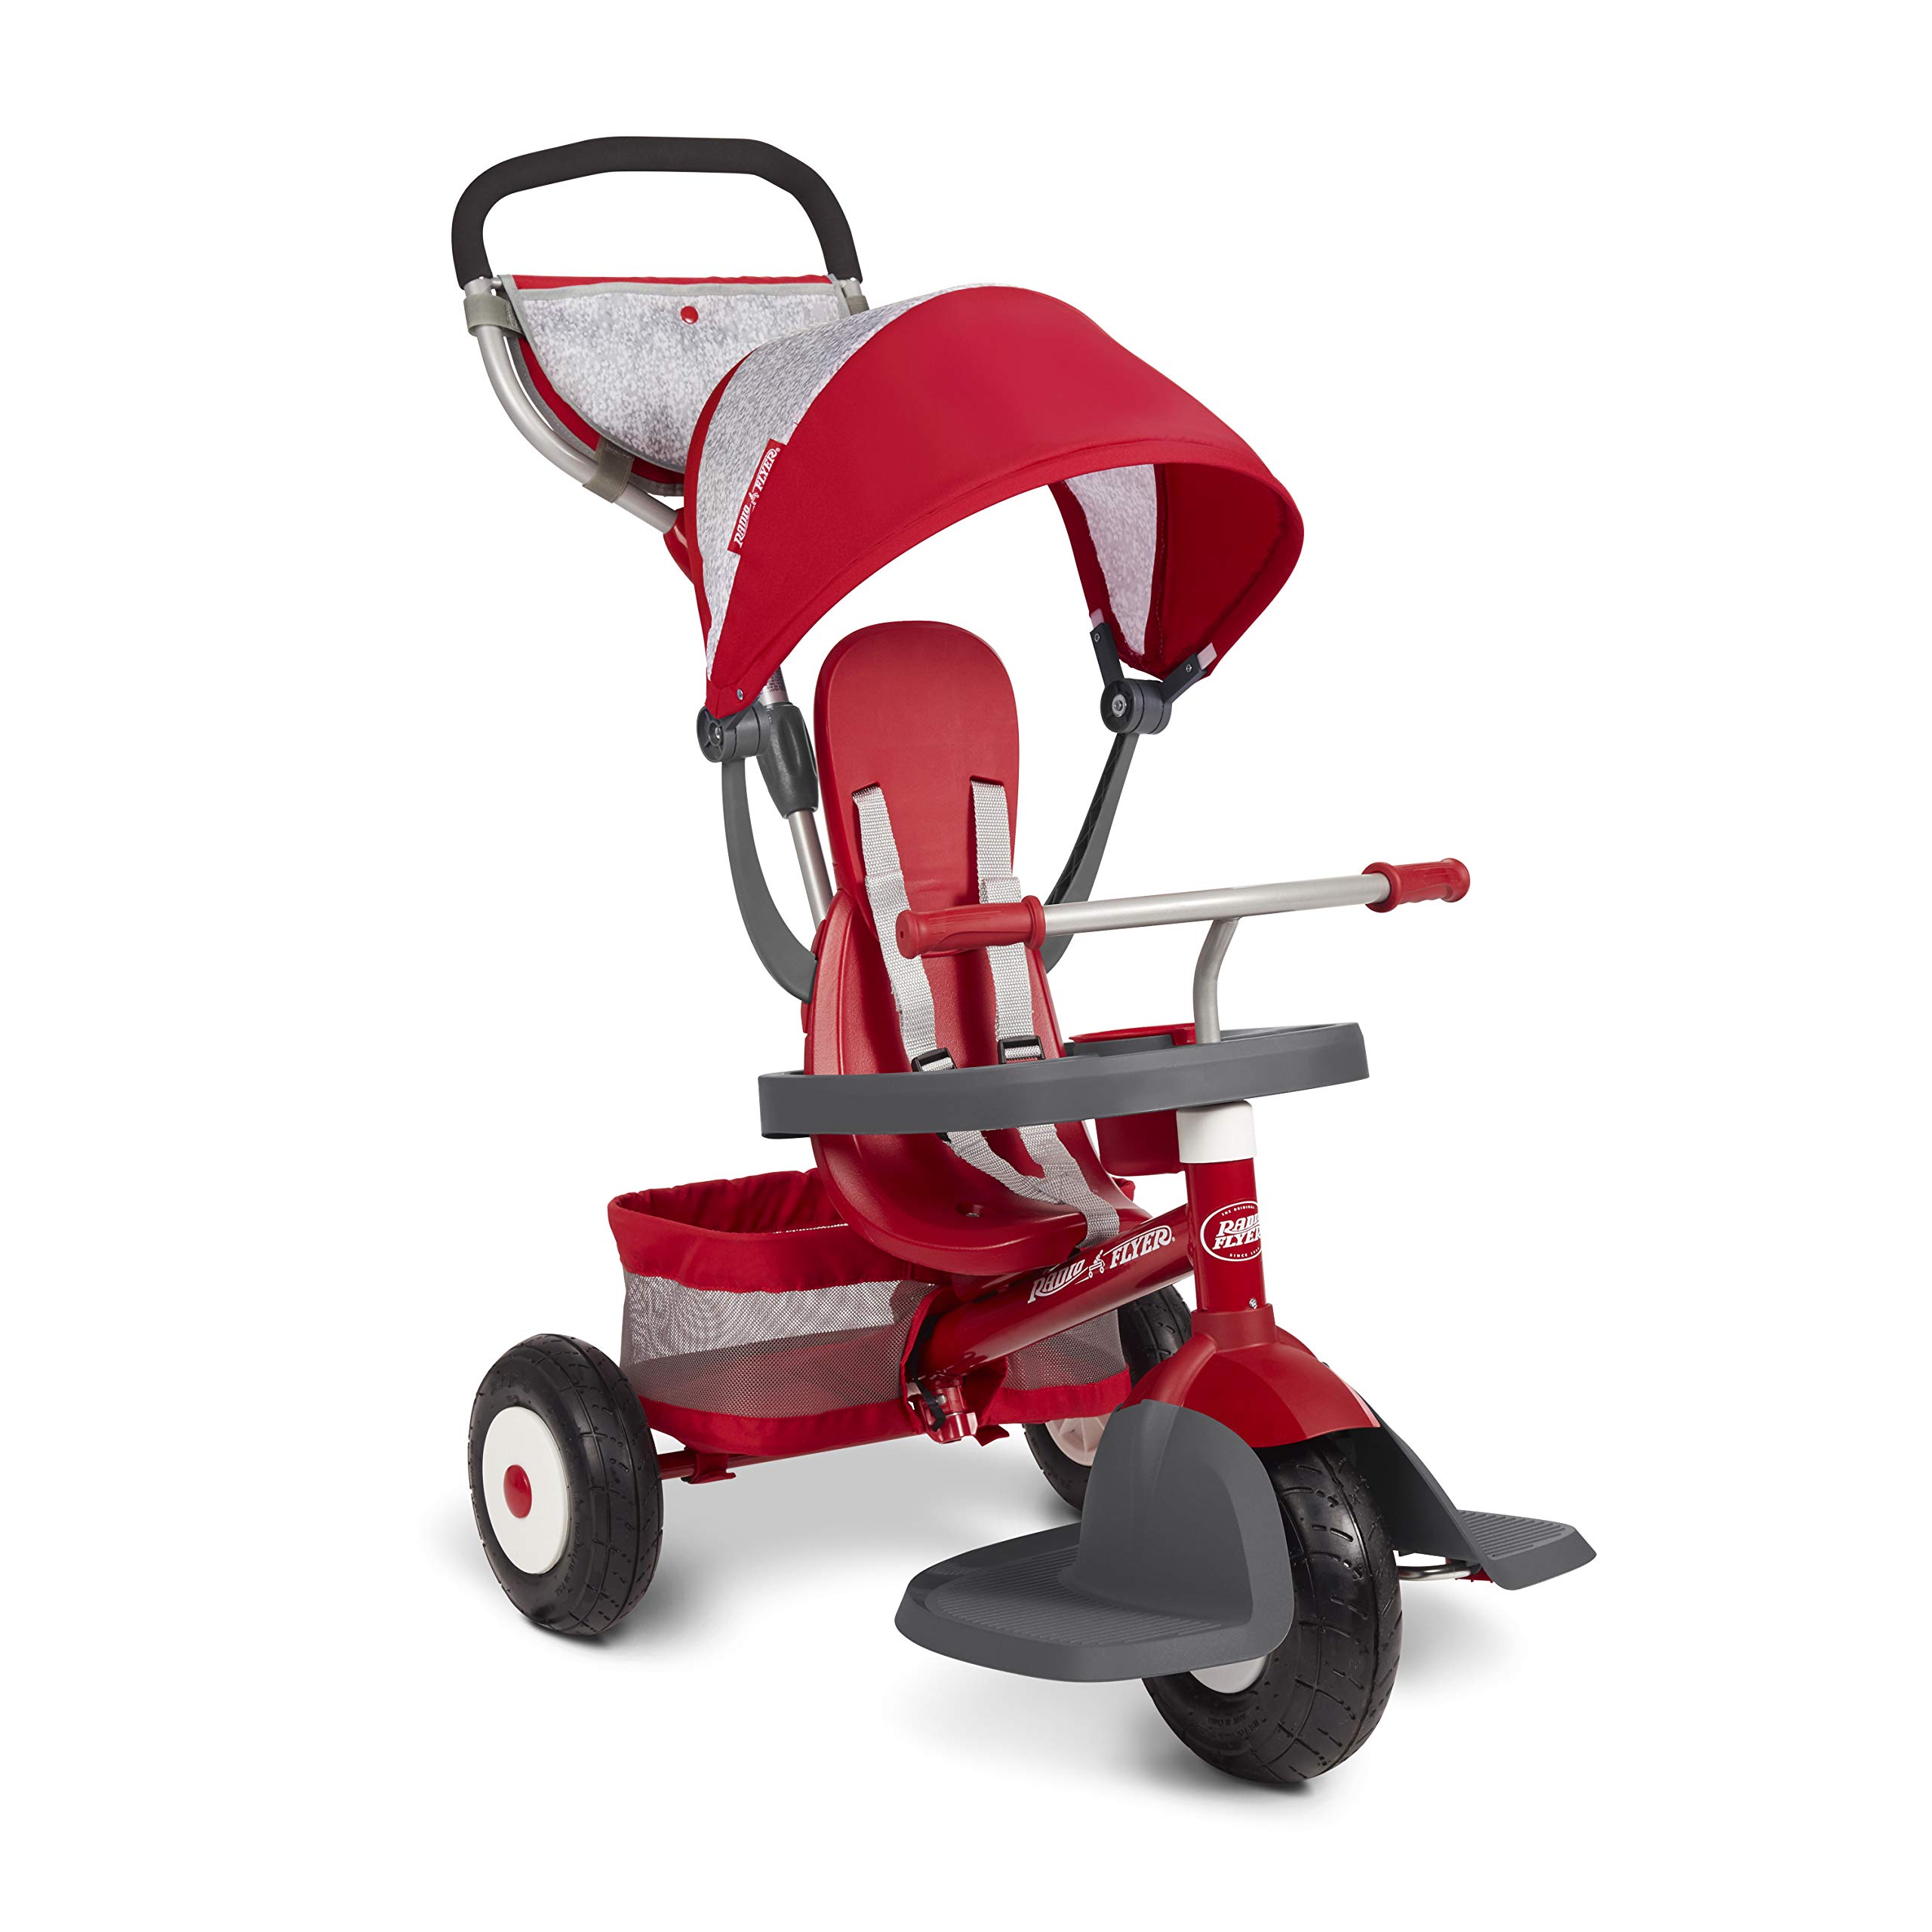 Radio Flyer Ultimate All-Terrain Stroll 'N Trike, Kids and Toddler Tricycle, Red Toddler Bike, For Ages 9 Months - 5 Years